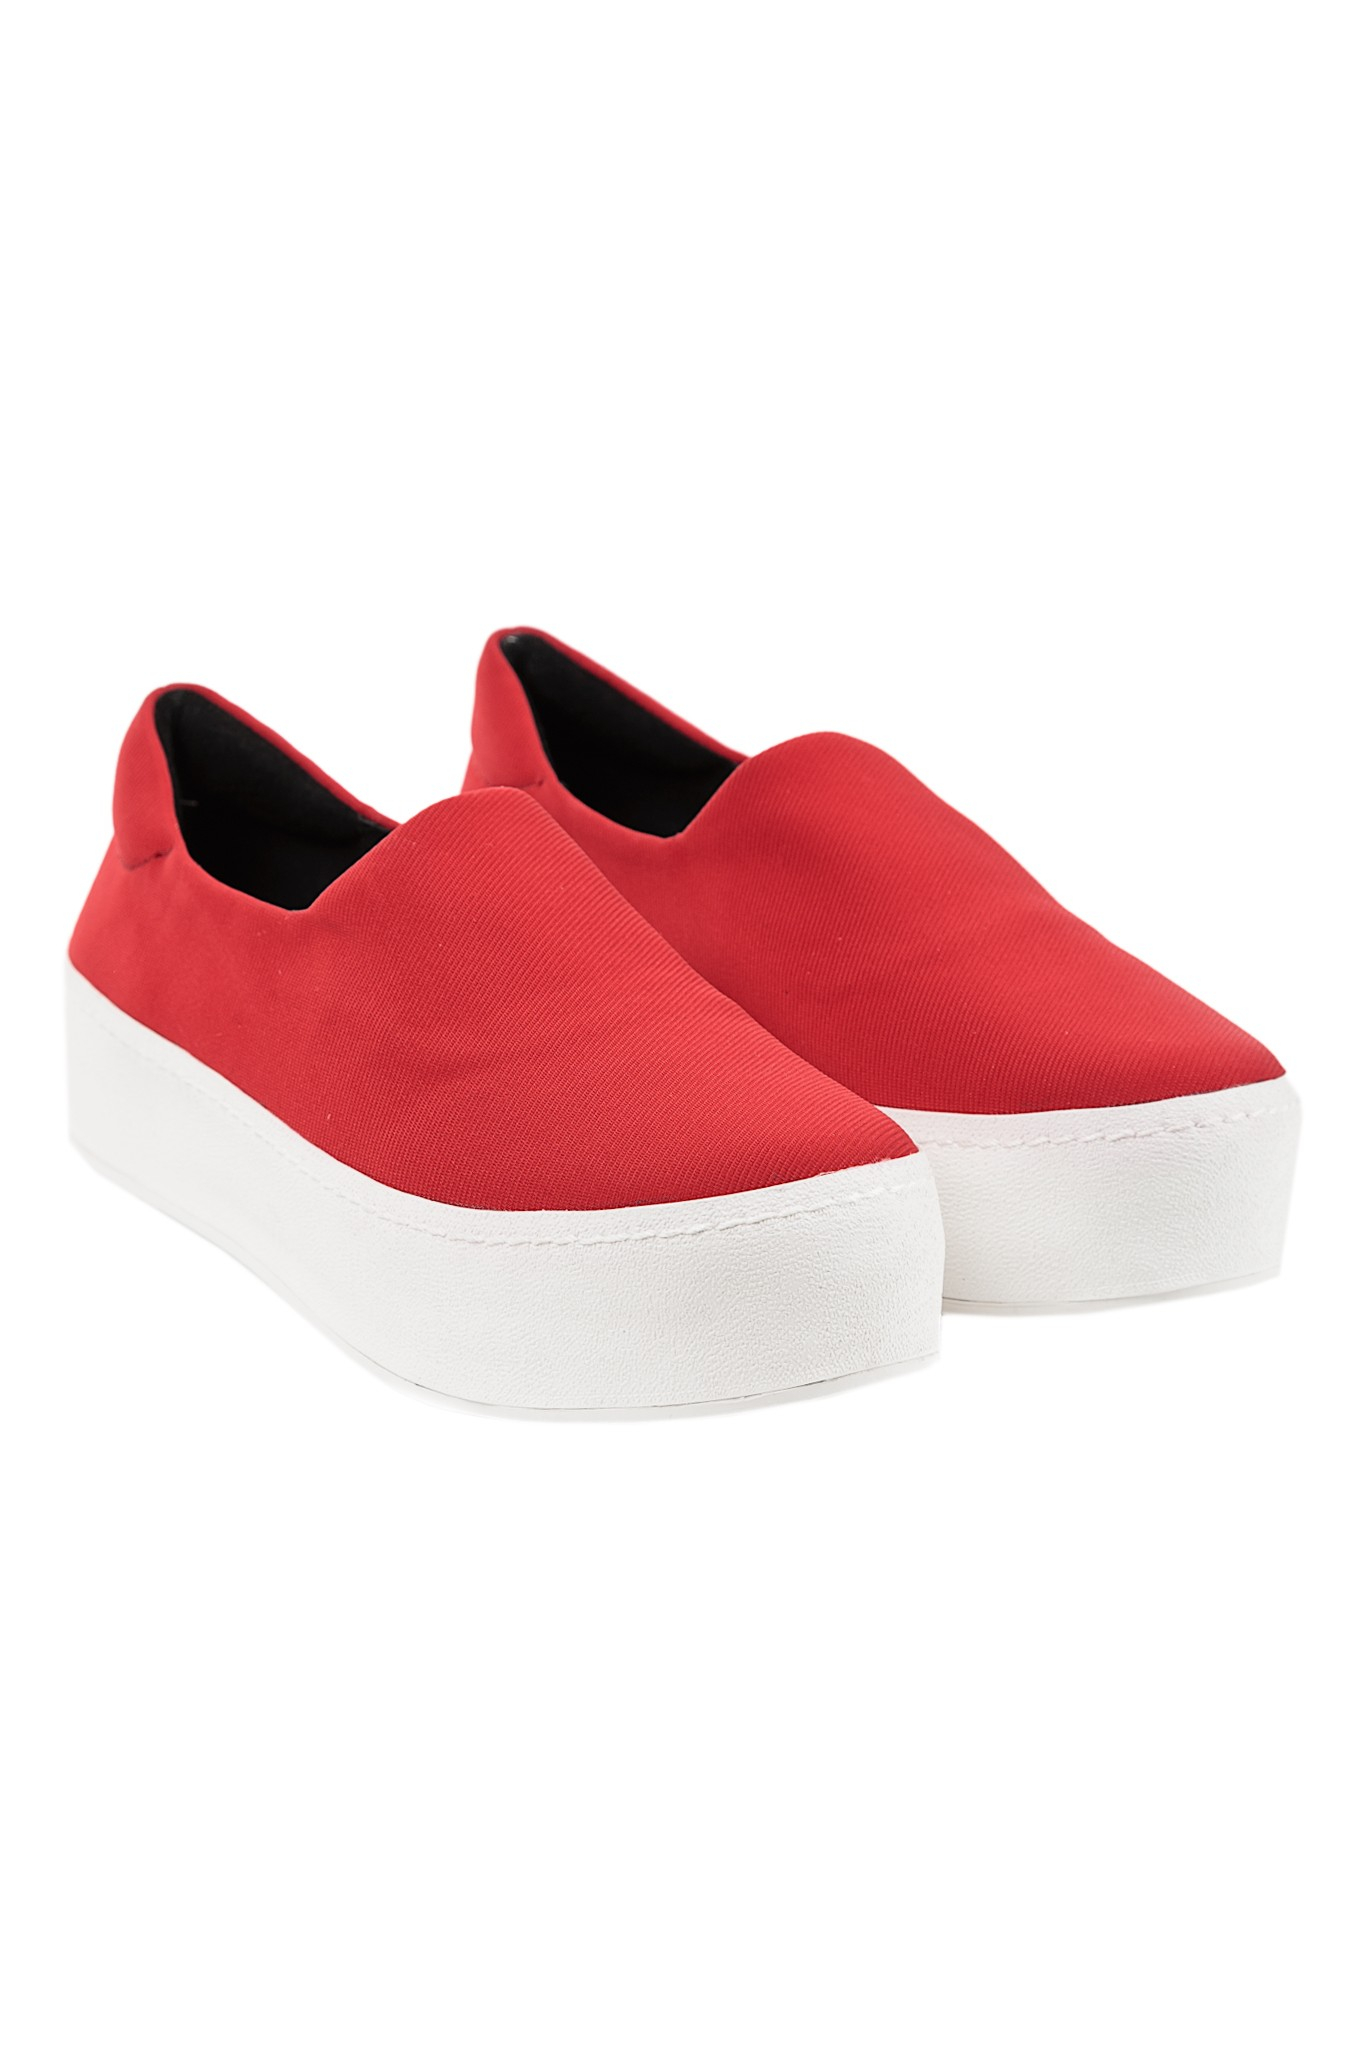 Opening Ceremony Slip On Platform Sneakers in Red | Lyst